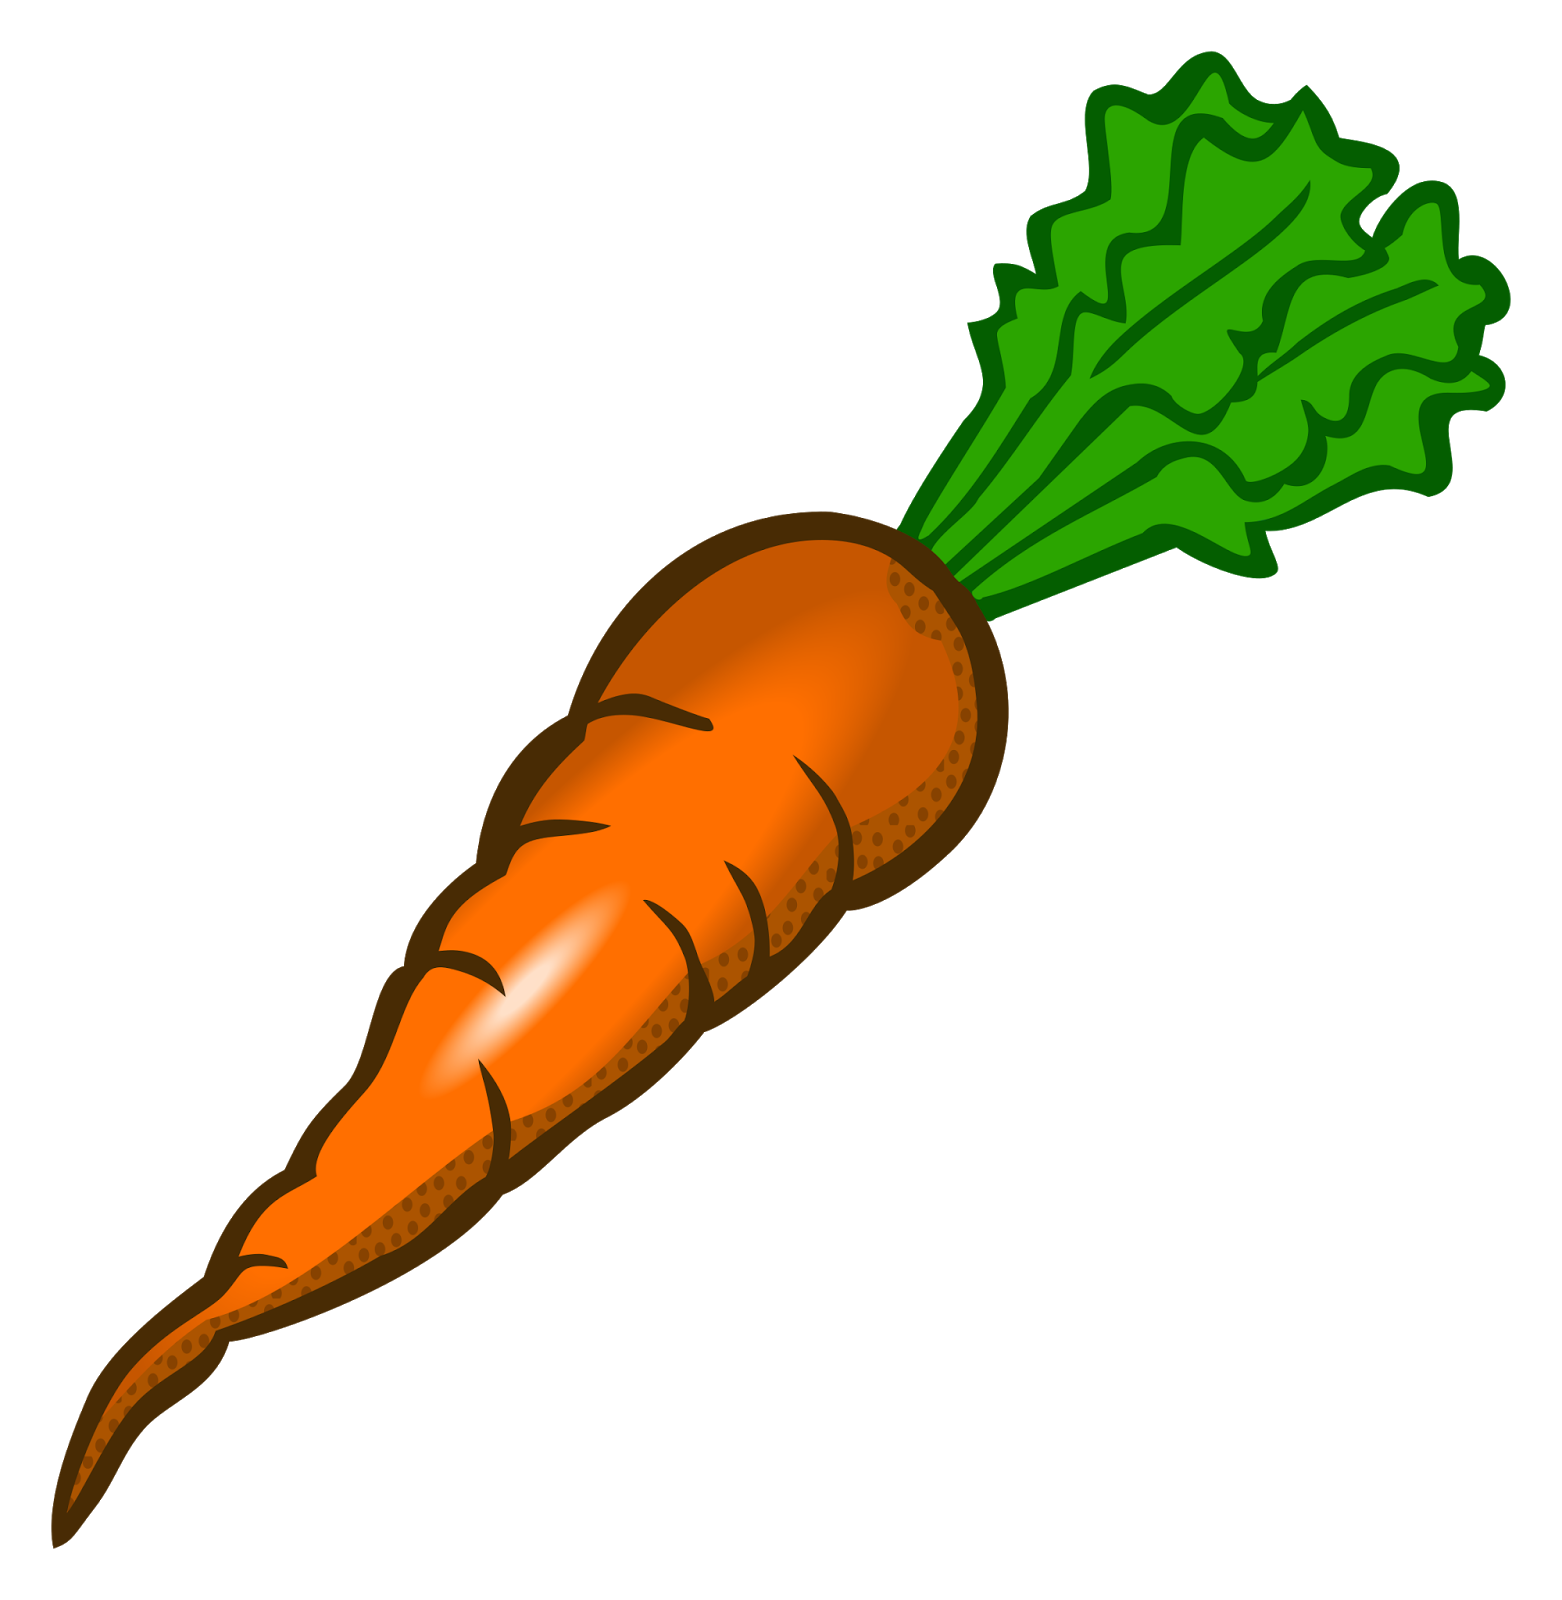 Vegetables clipart carrot stick. Writing from home my